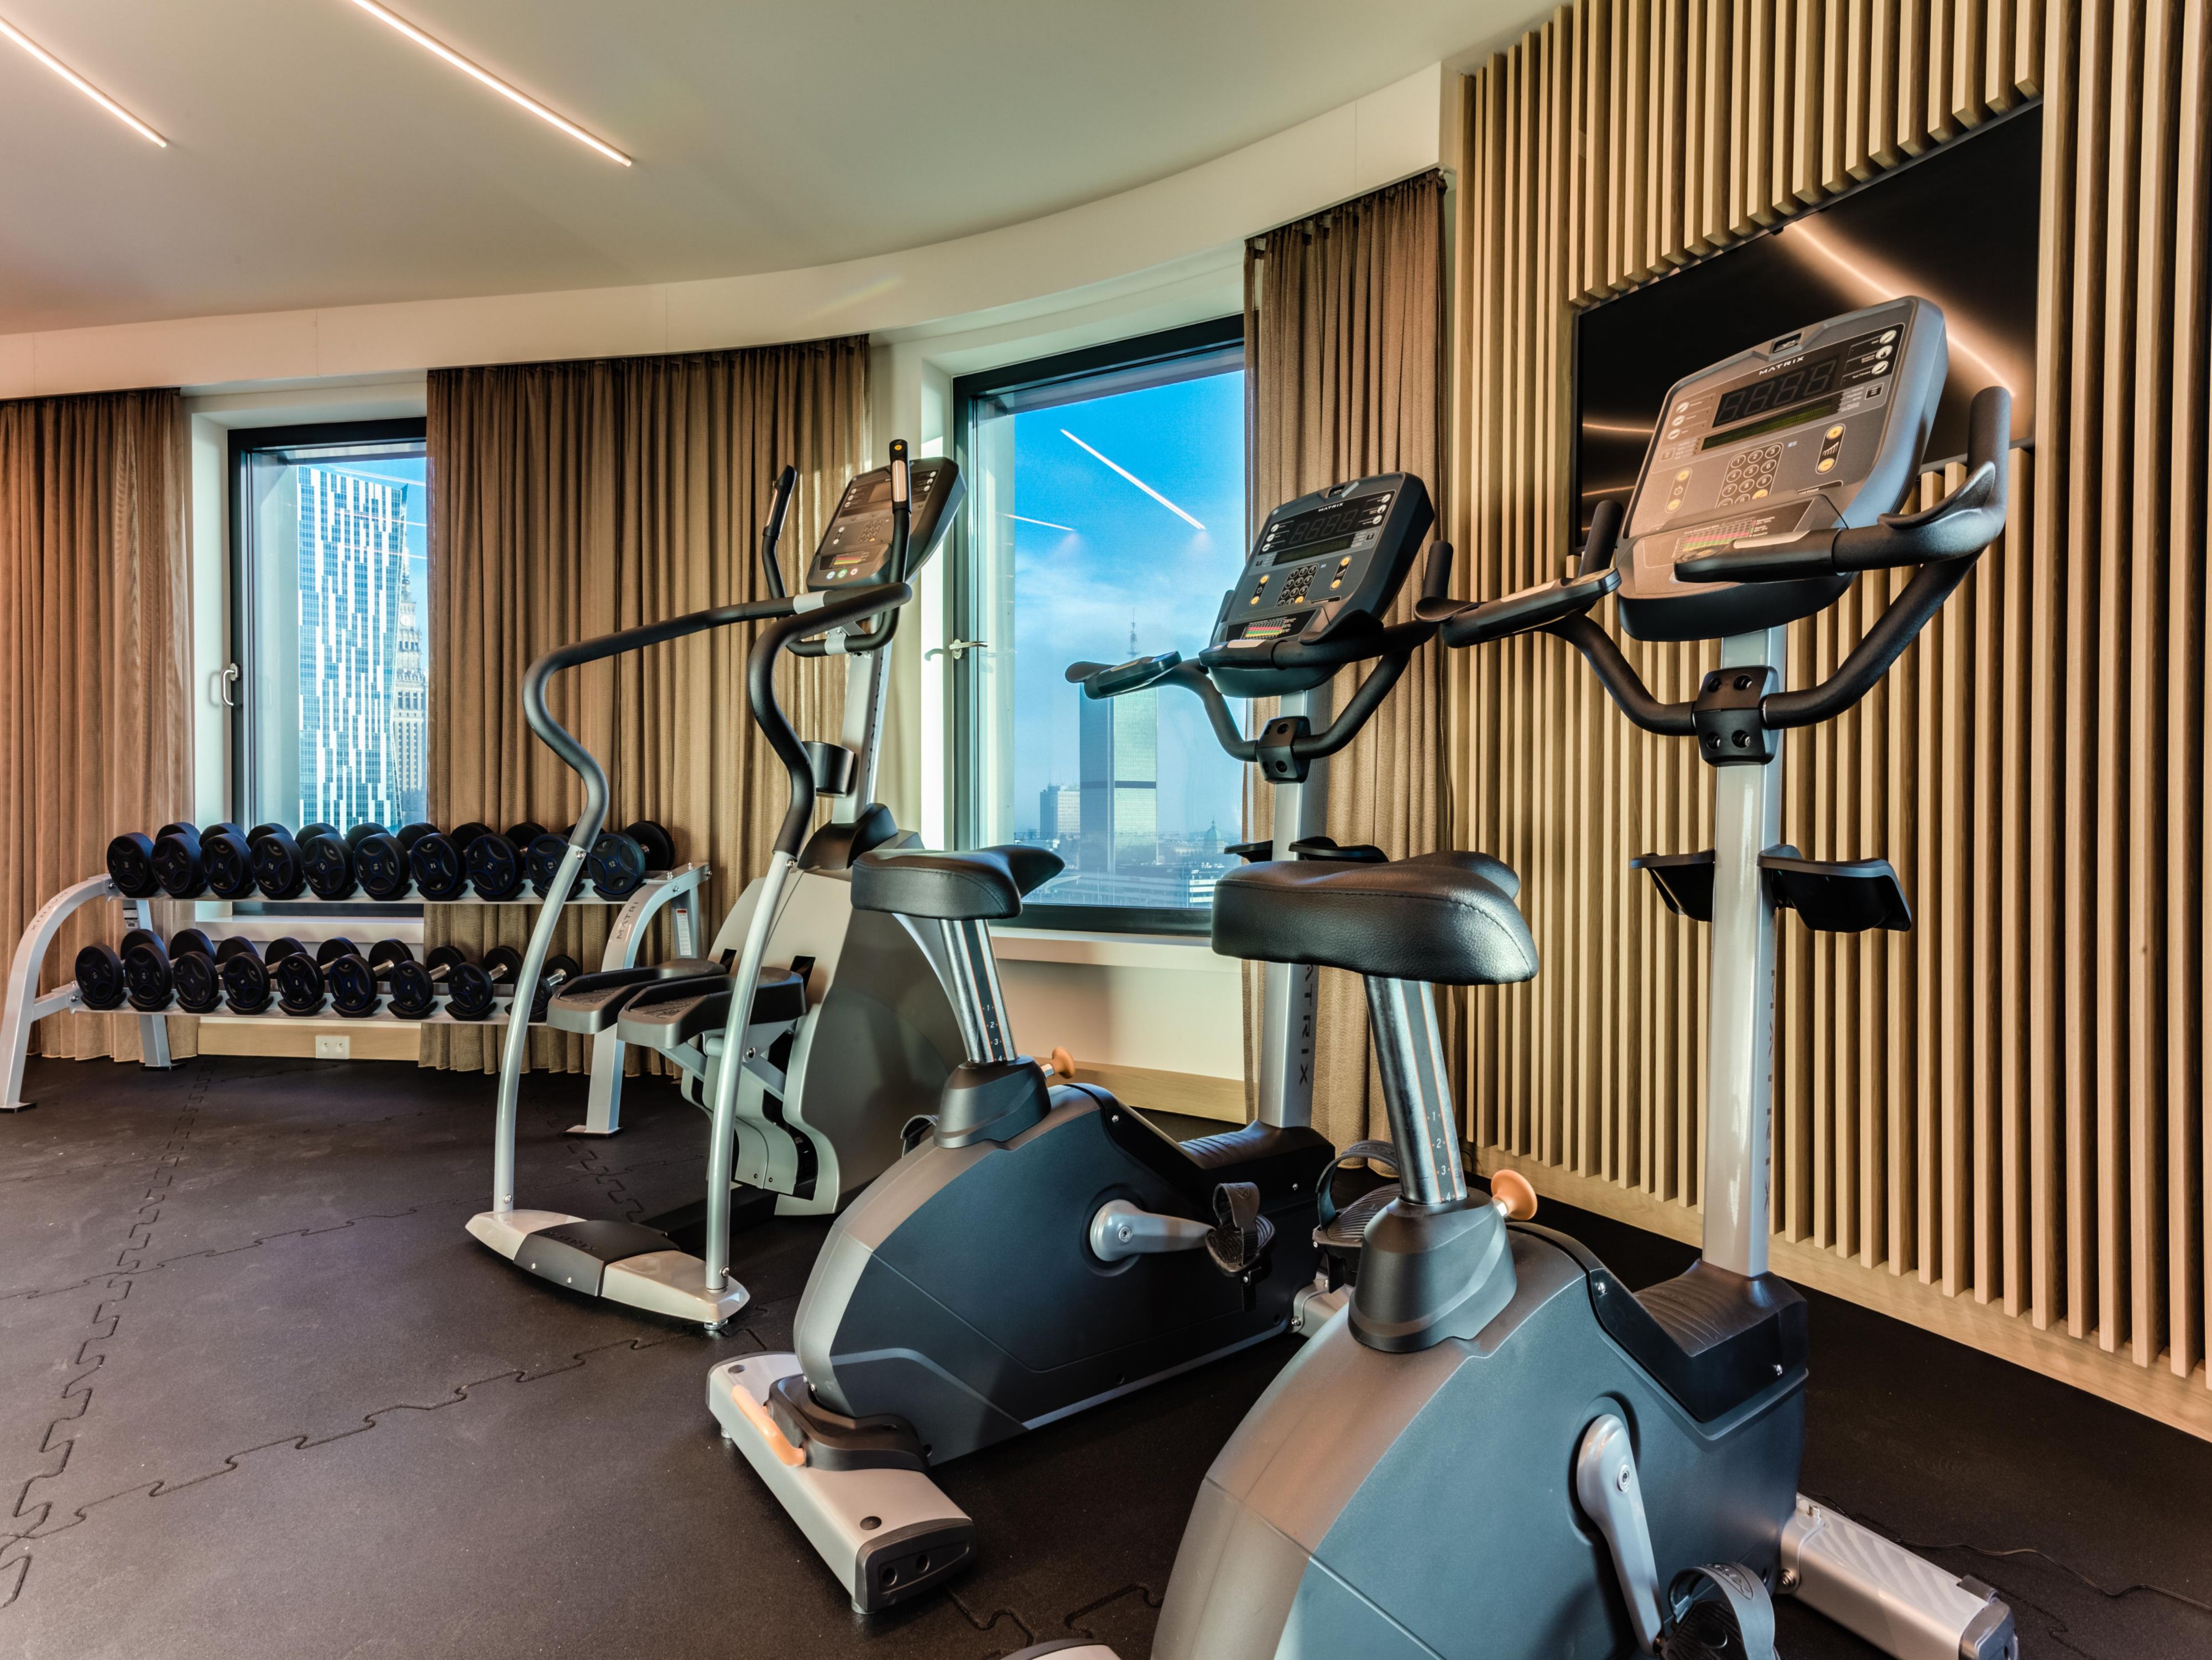 Are you planning to stay at the hotel with the Fitness Centre providing spectacular views? You are in the right place. In the Fitness Centre located on the top floor, you can take a step back after a busy day. Use the treadmill, oars or the free weights zone and enjoy the panoramic view of Warsaw.